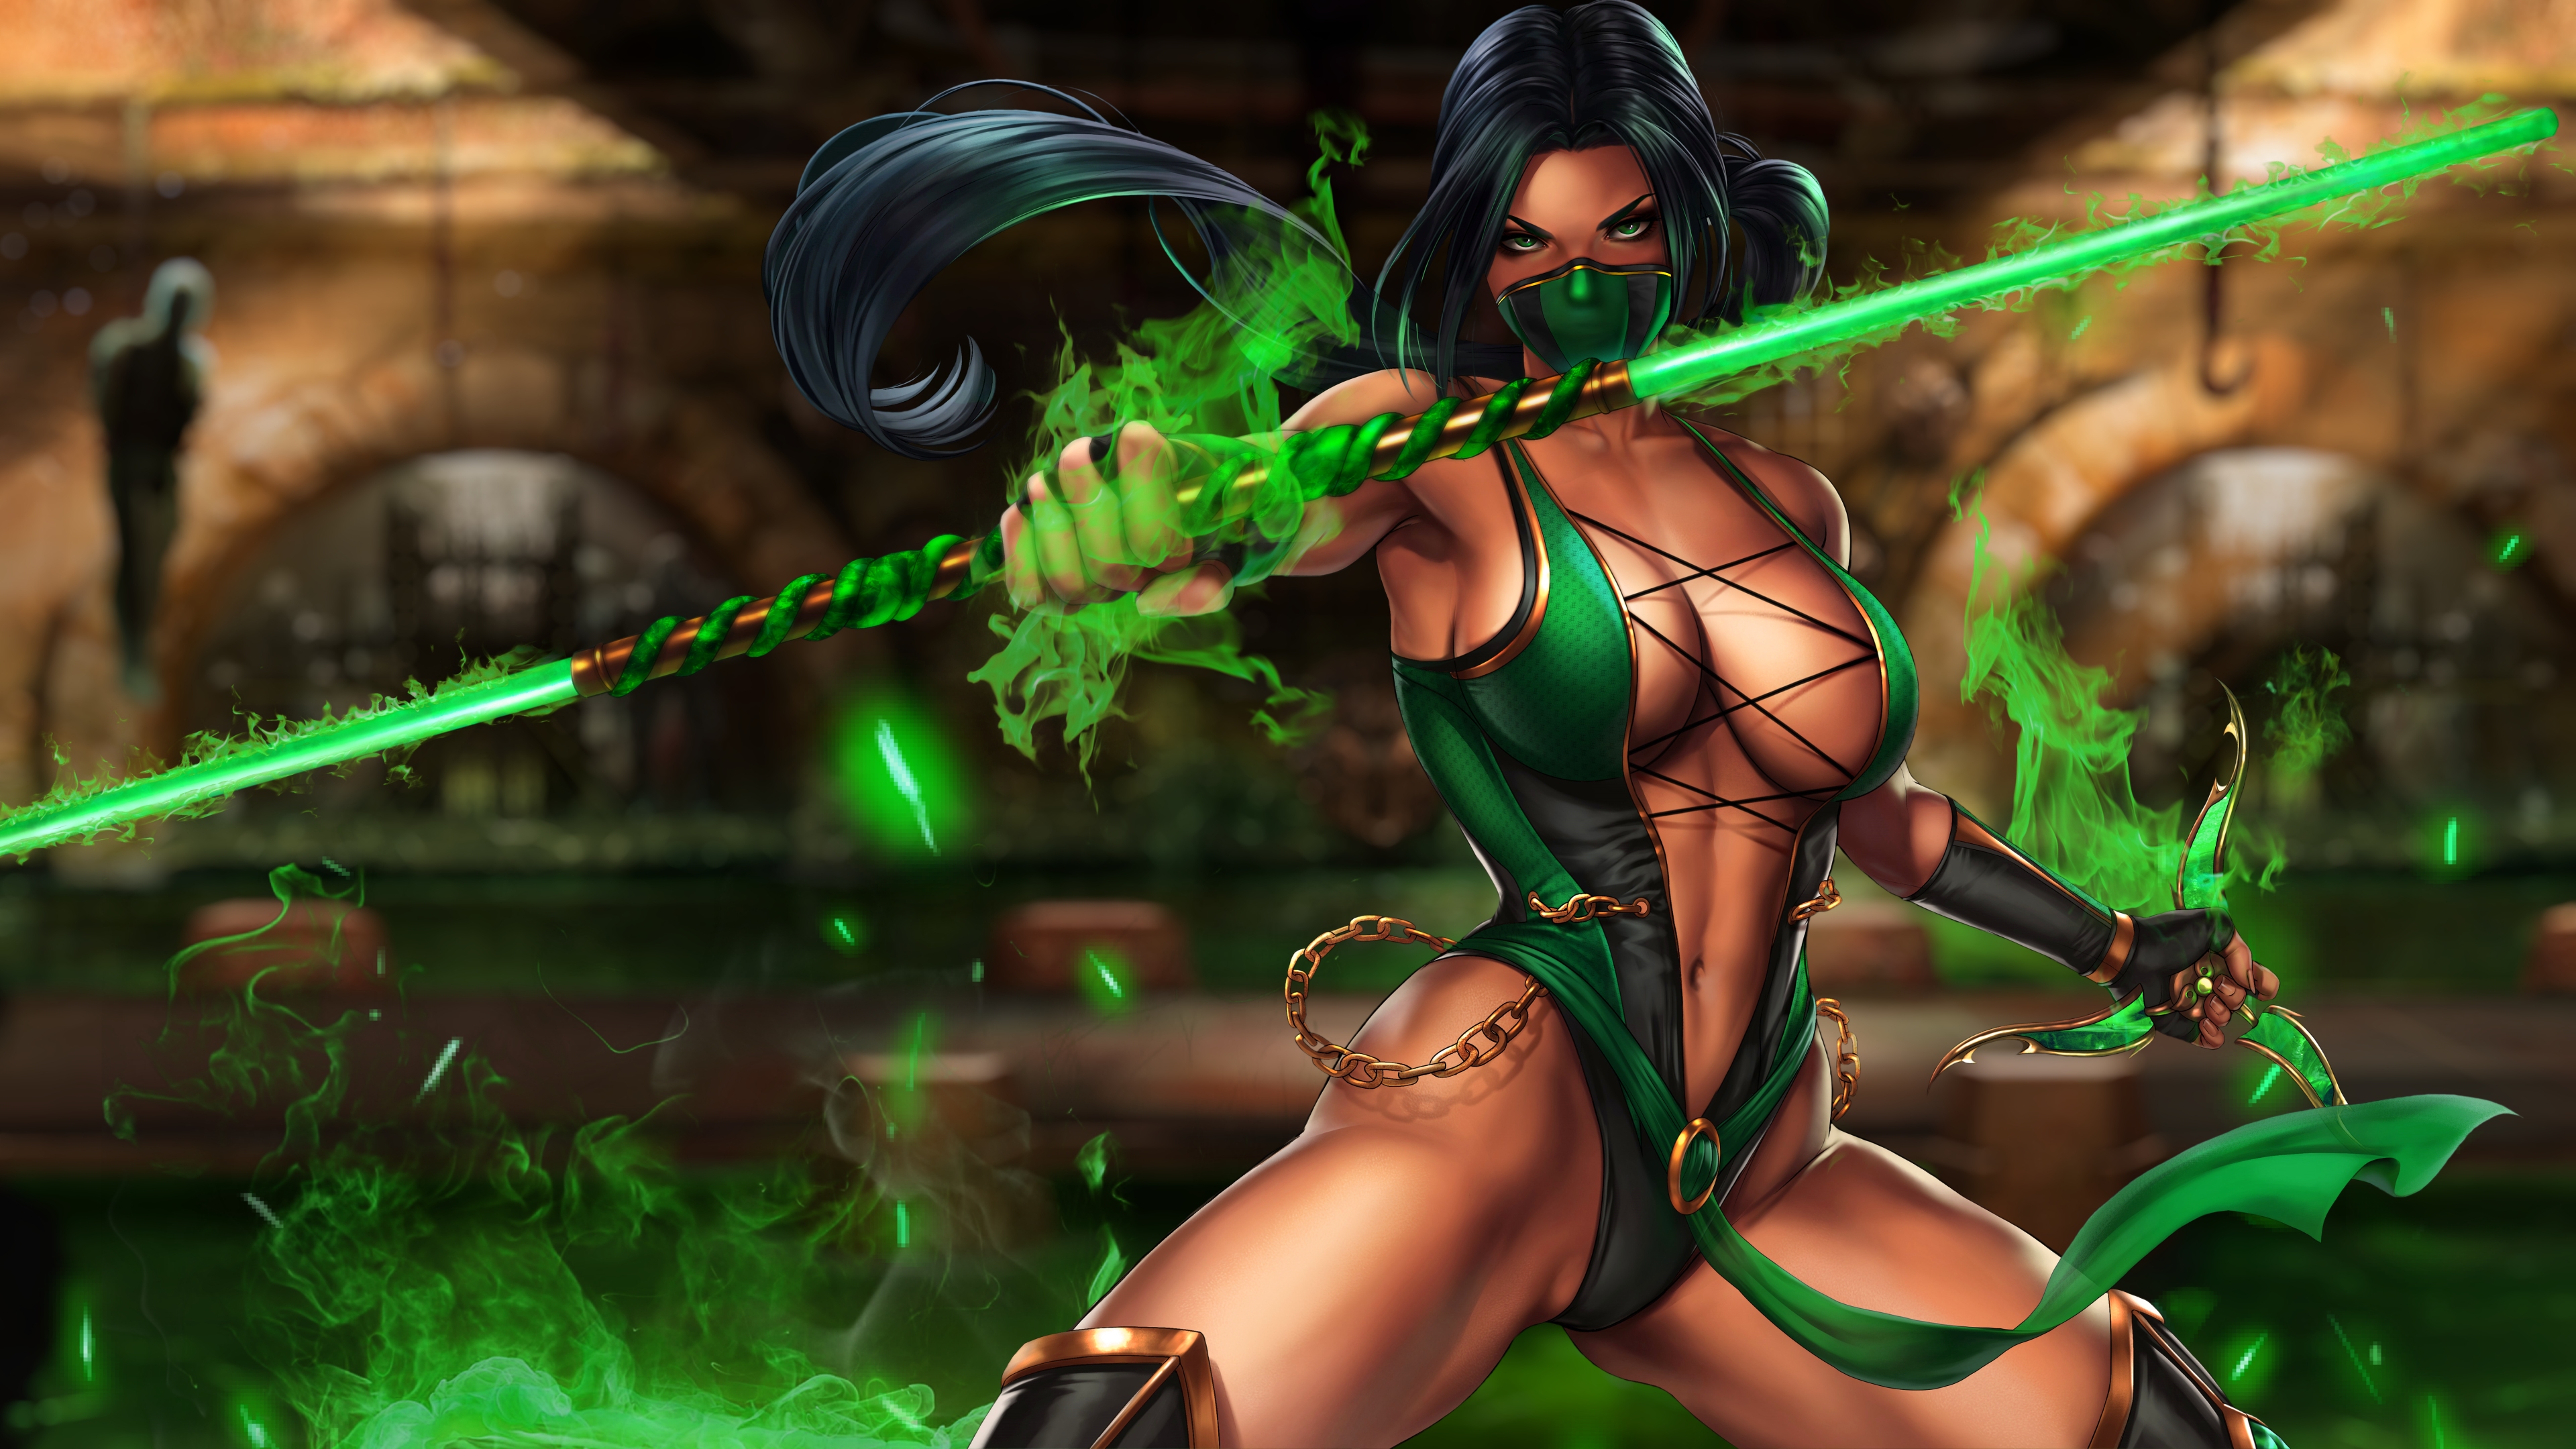 Green sword in the hands of a fantasy girl